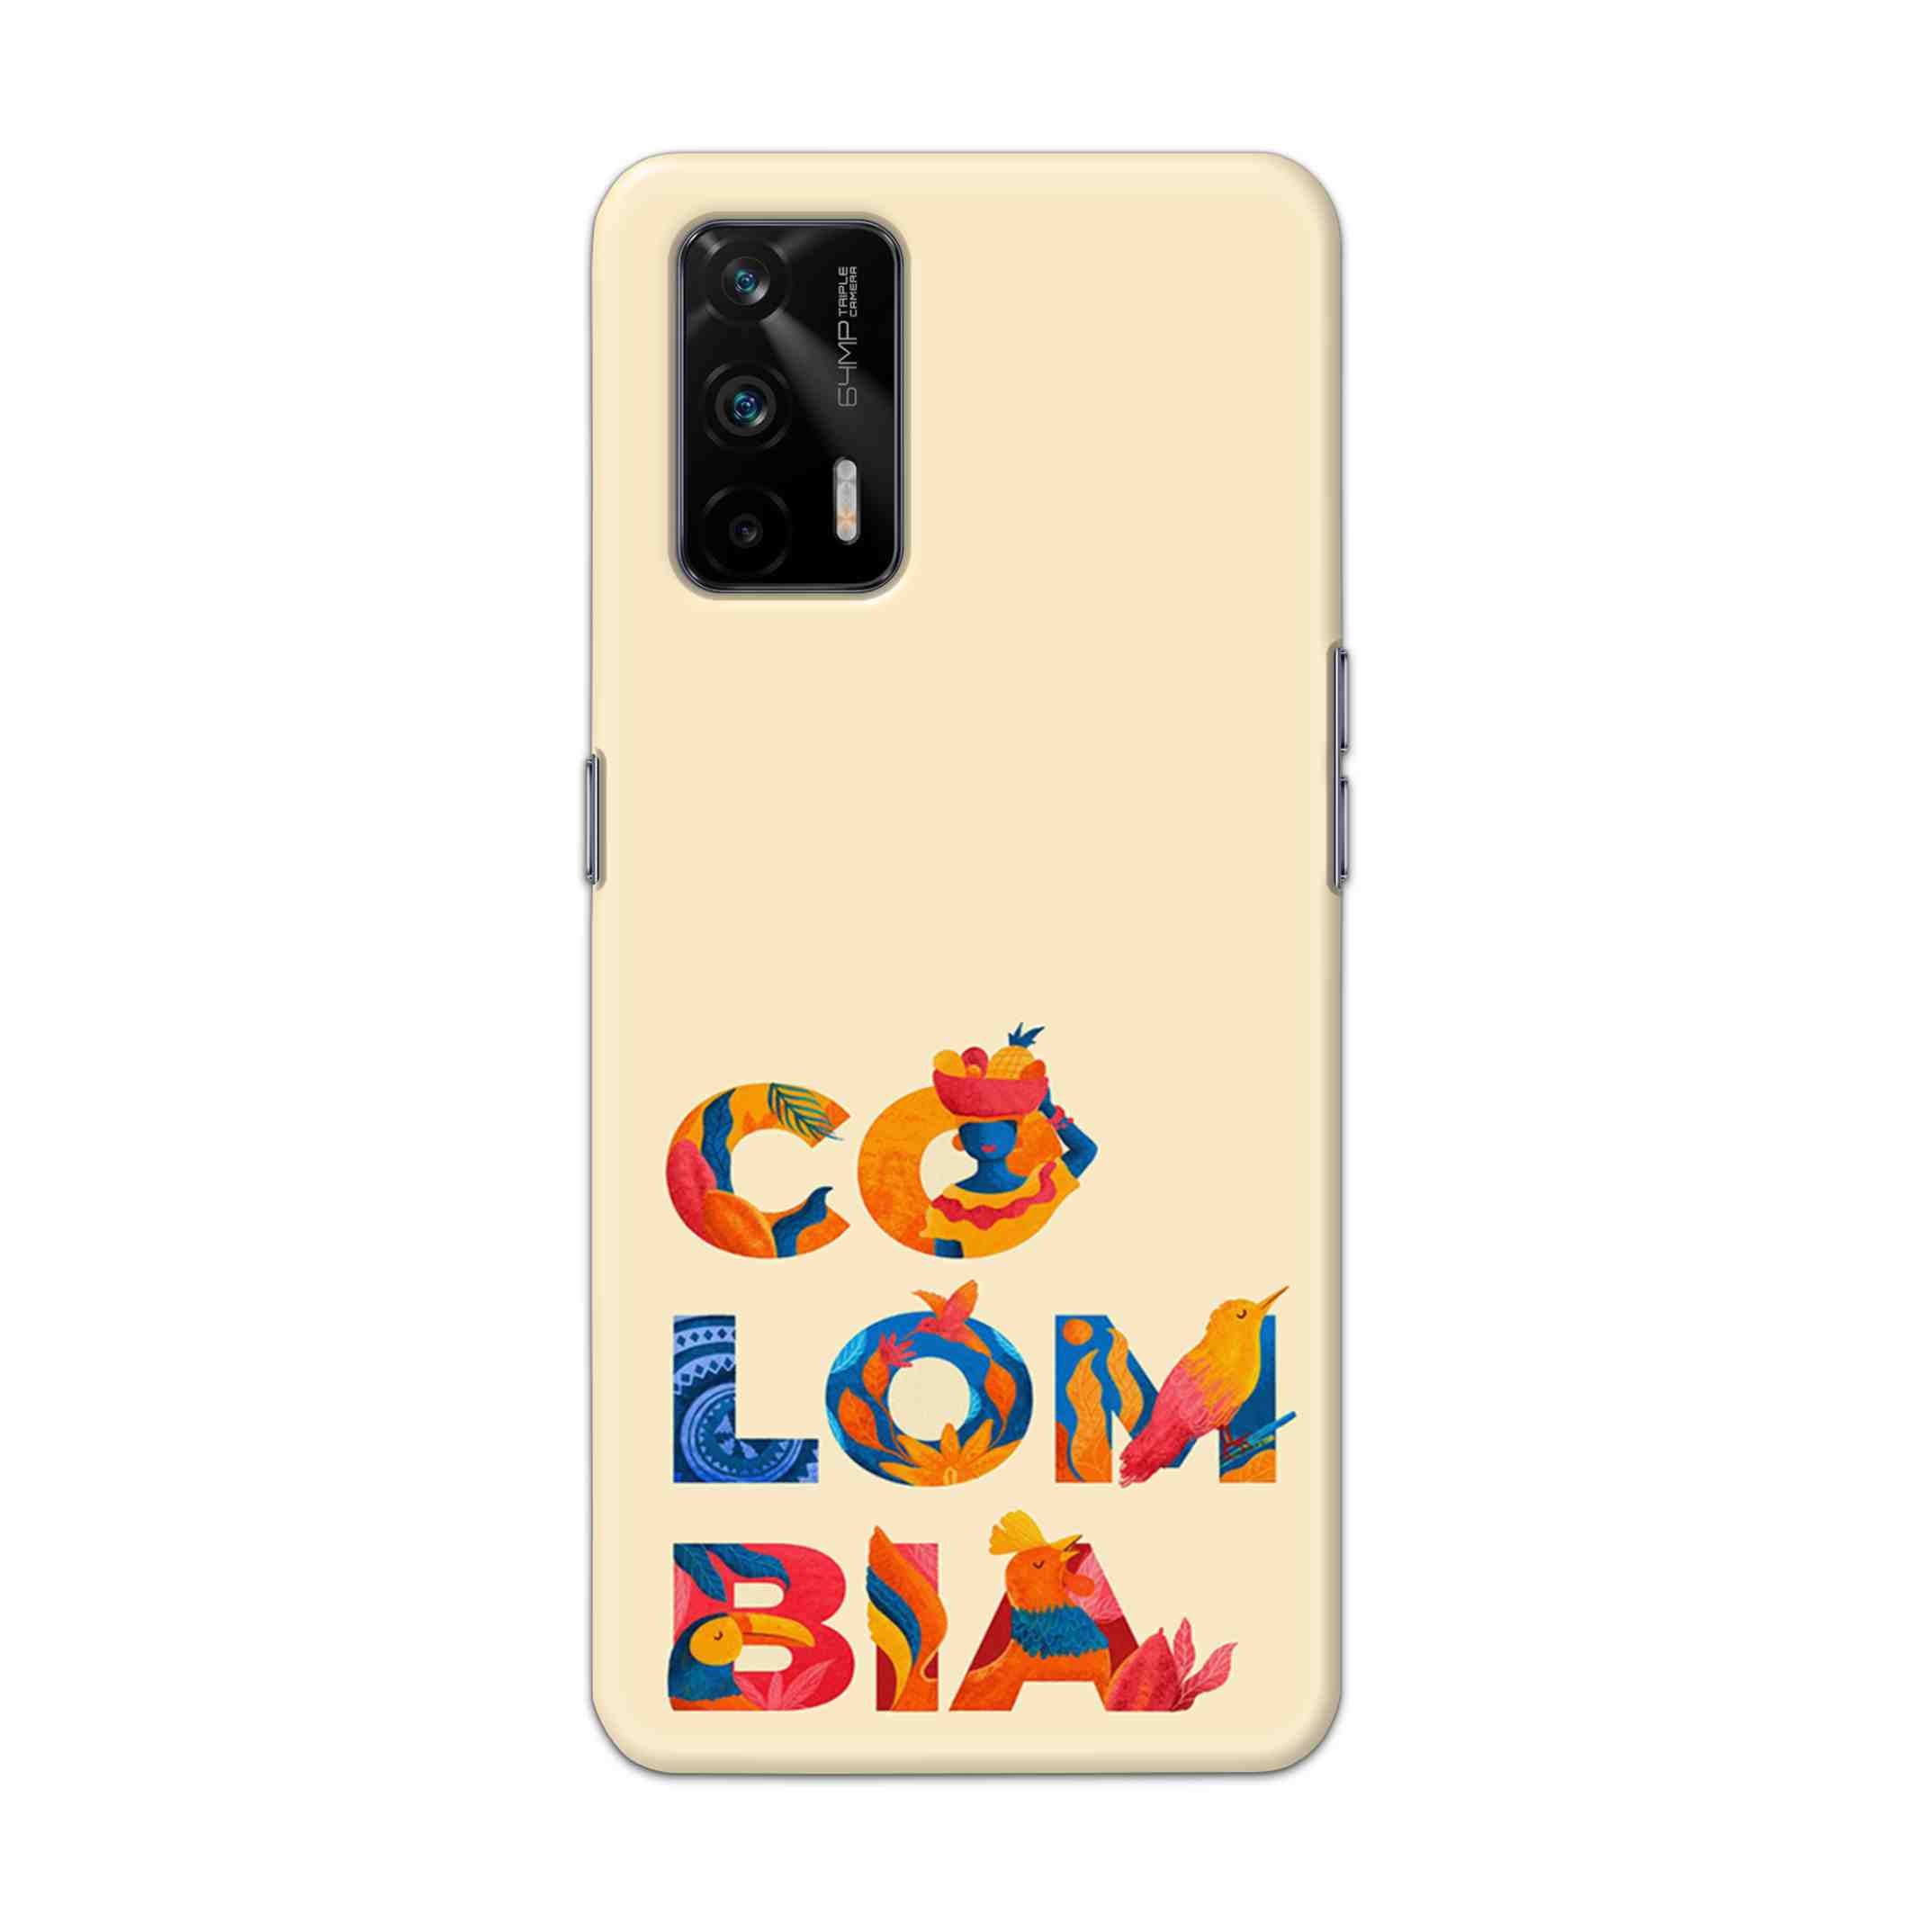 Buy Colombia Hard Back Mobile Phone Case Cover For Realme X7 Max Online